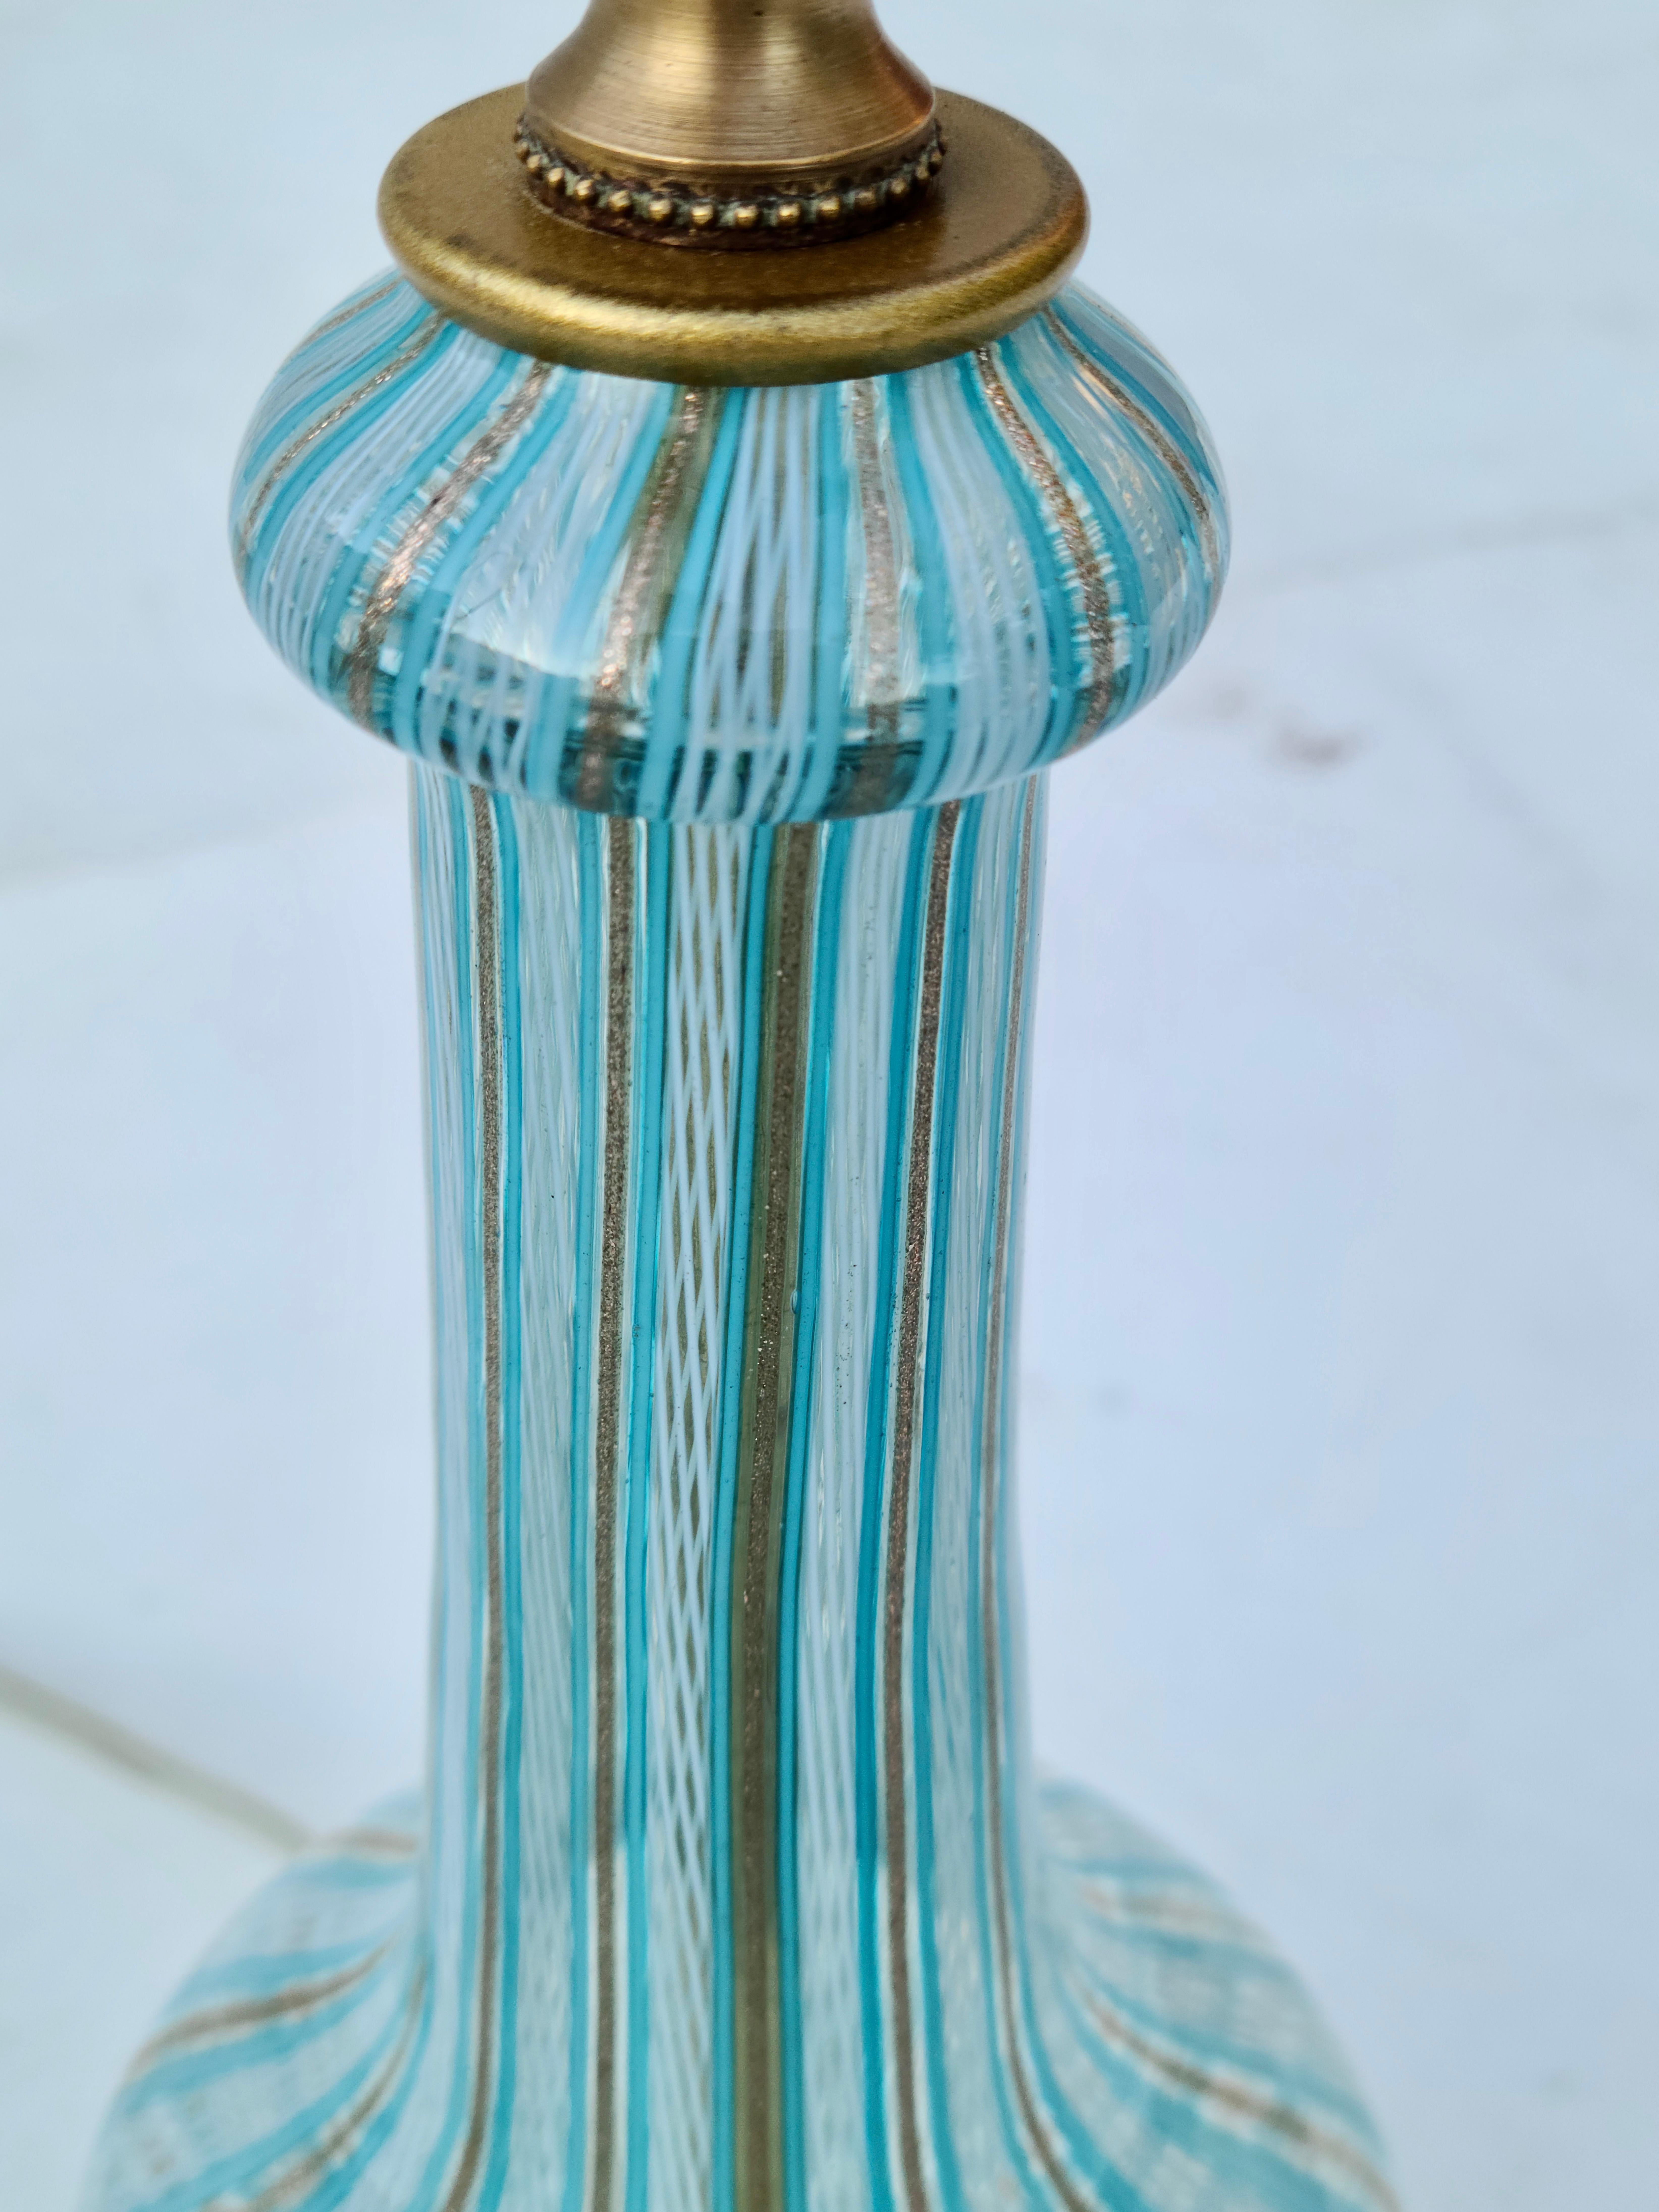 Pair Murano Glass Lamp Bases.

Woven Aqua Gold and White filaments.